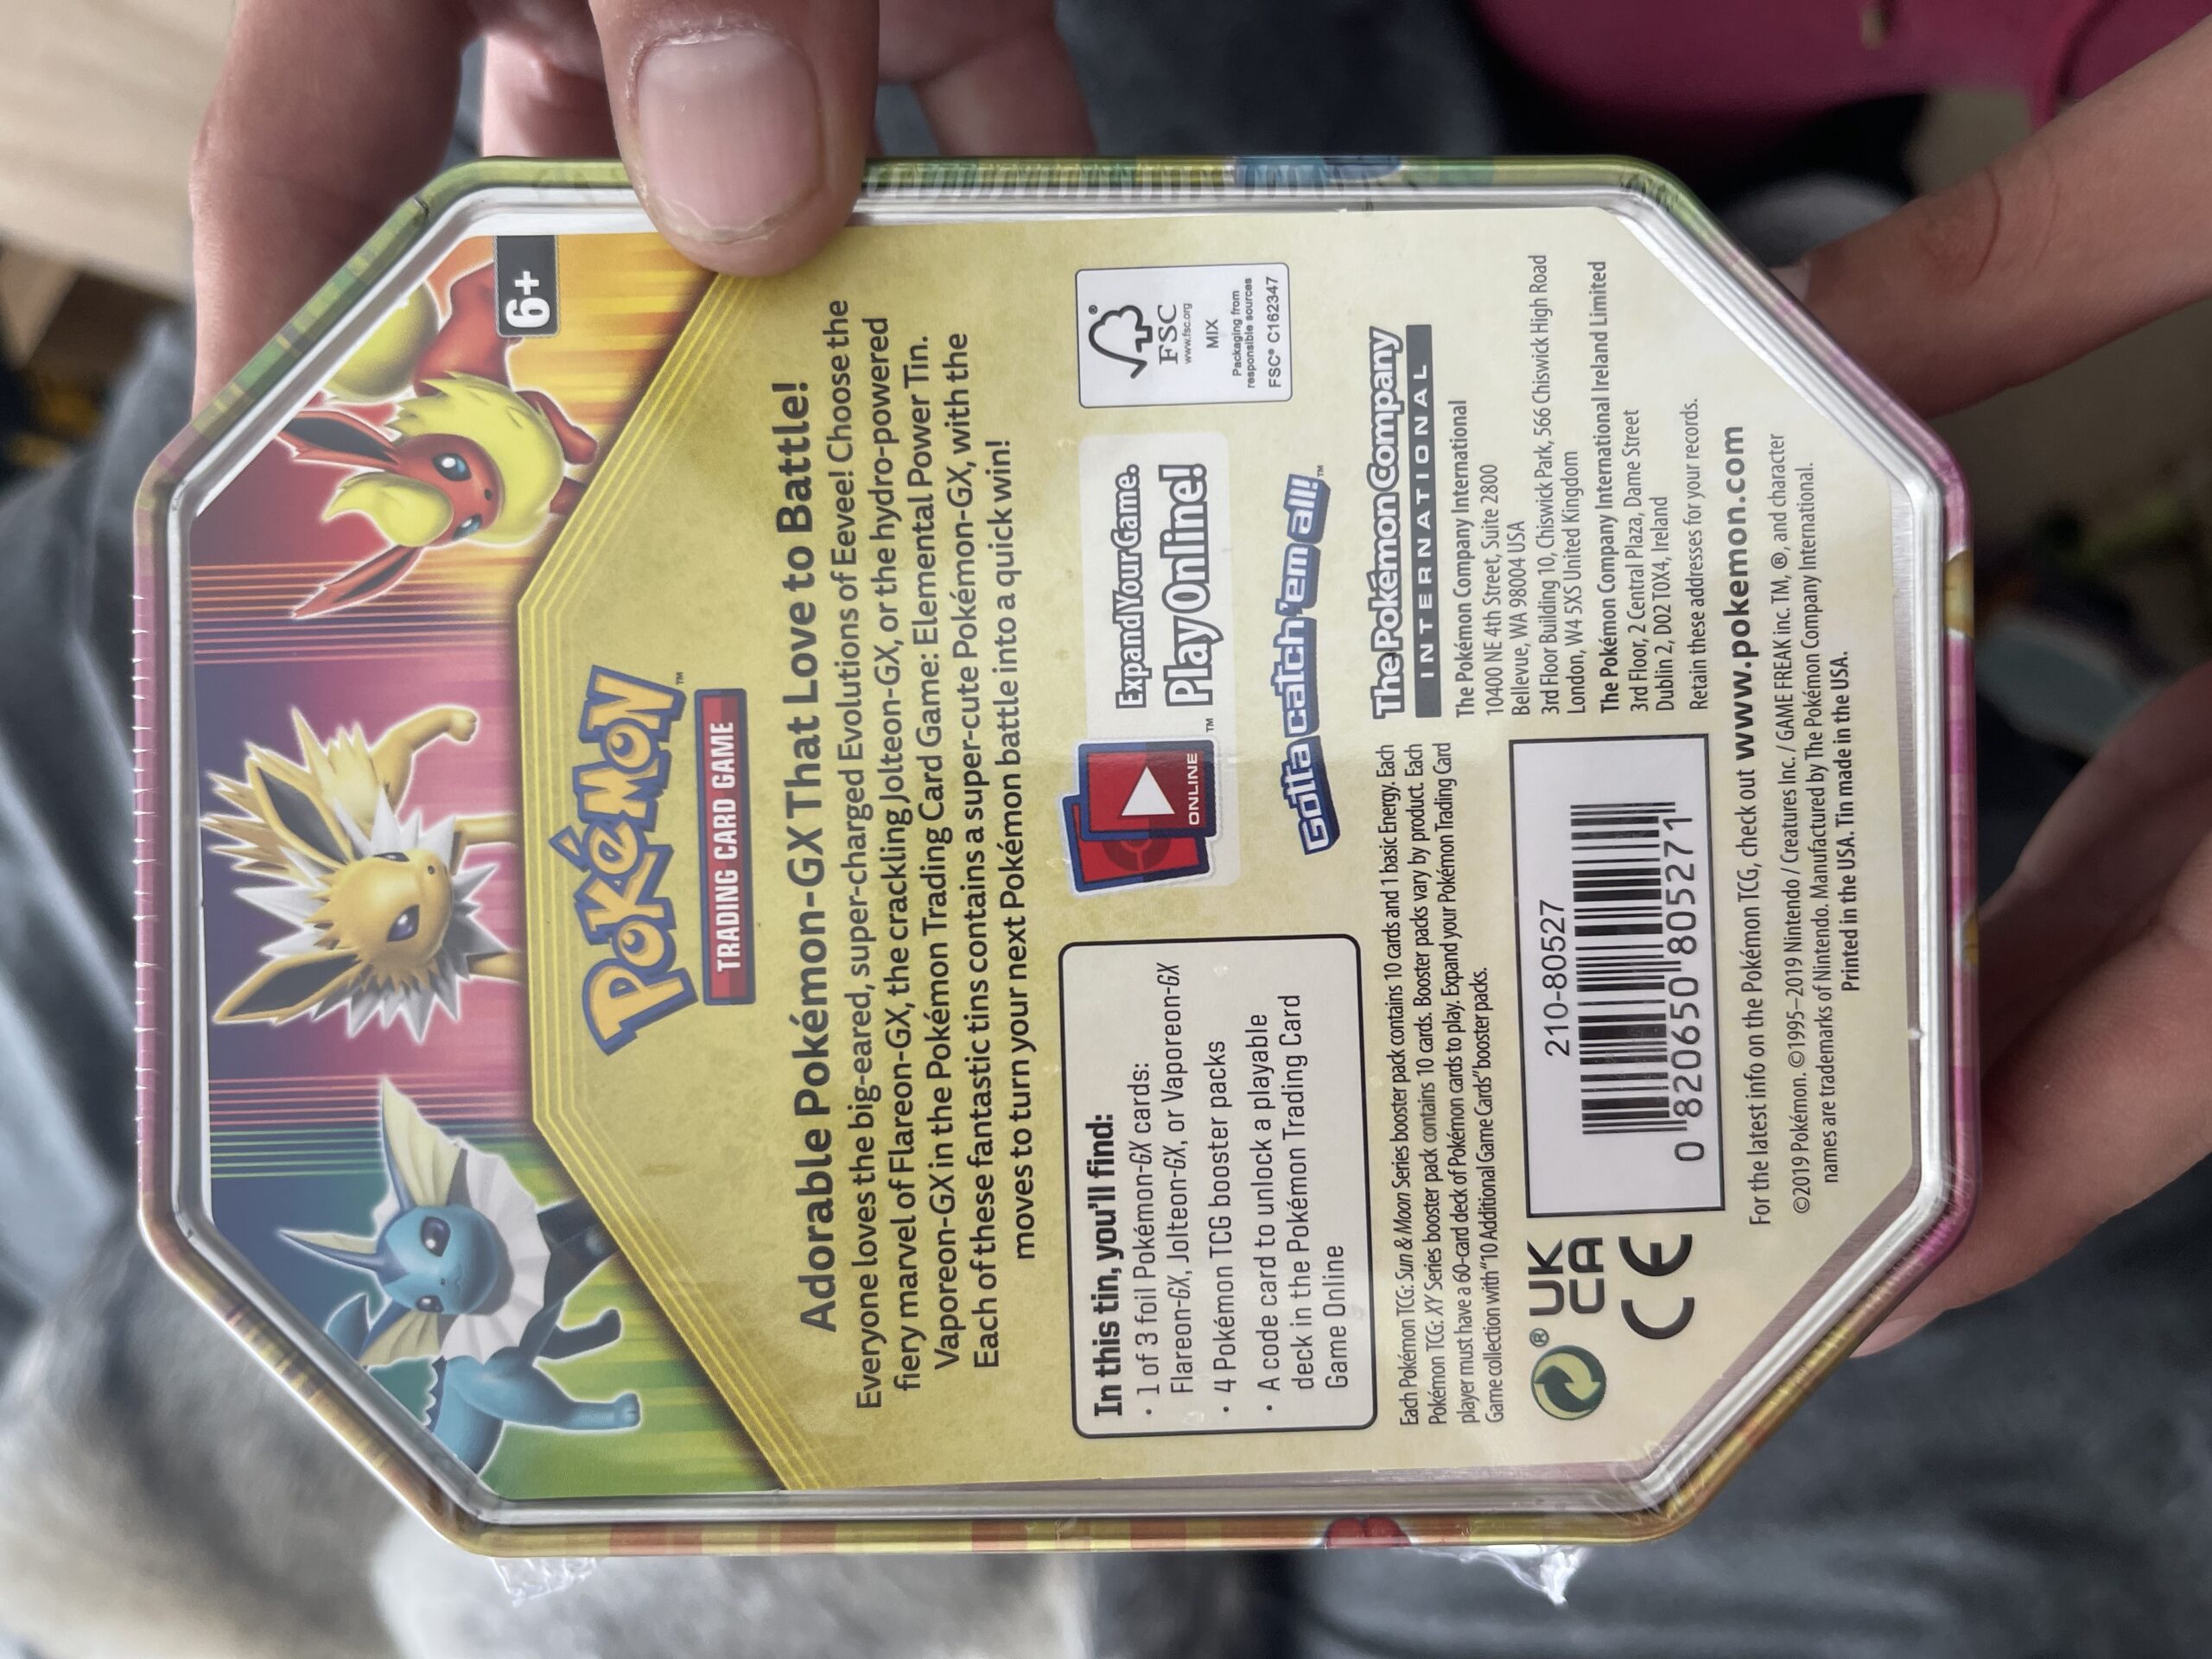 Tesco complaint Pokémon boxes have all been tampered with